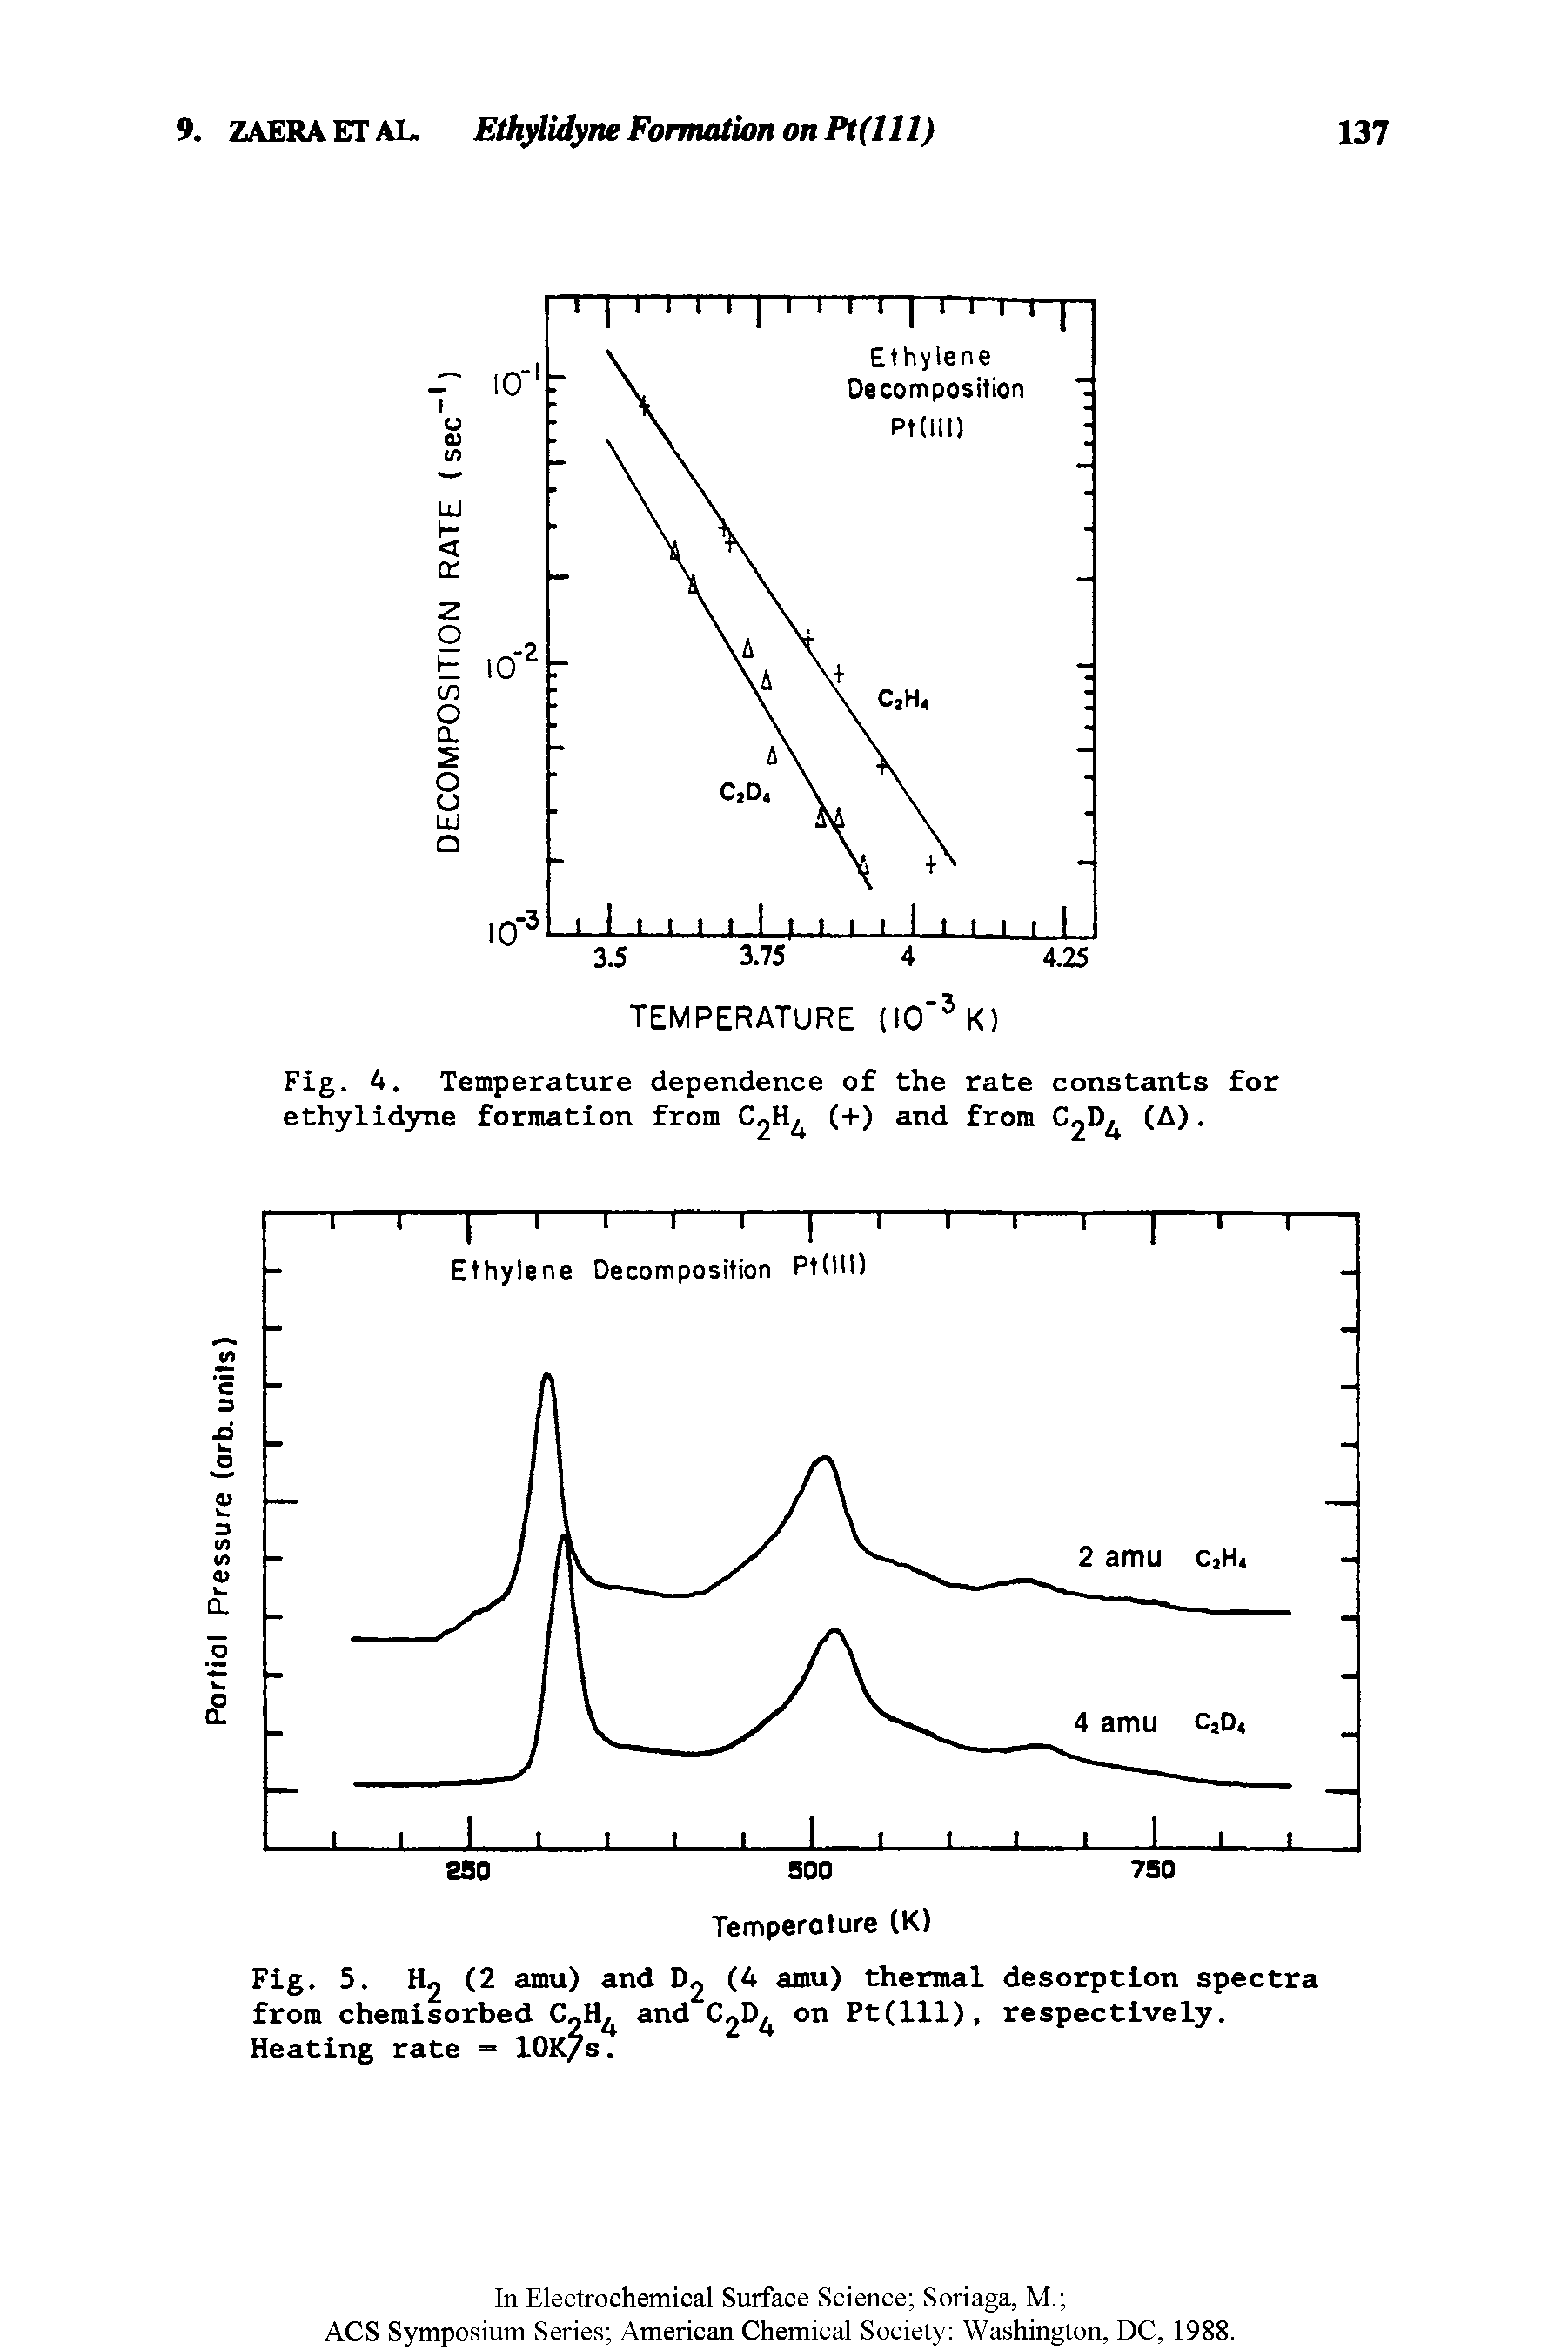 Fig. 5. H2 (2 amu) and D2 (4 amu) thermal desorption spectra from chemisorbed and on Pt(lll), respectively.